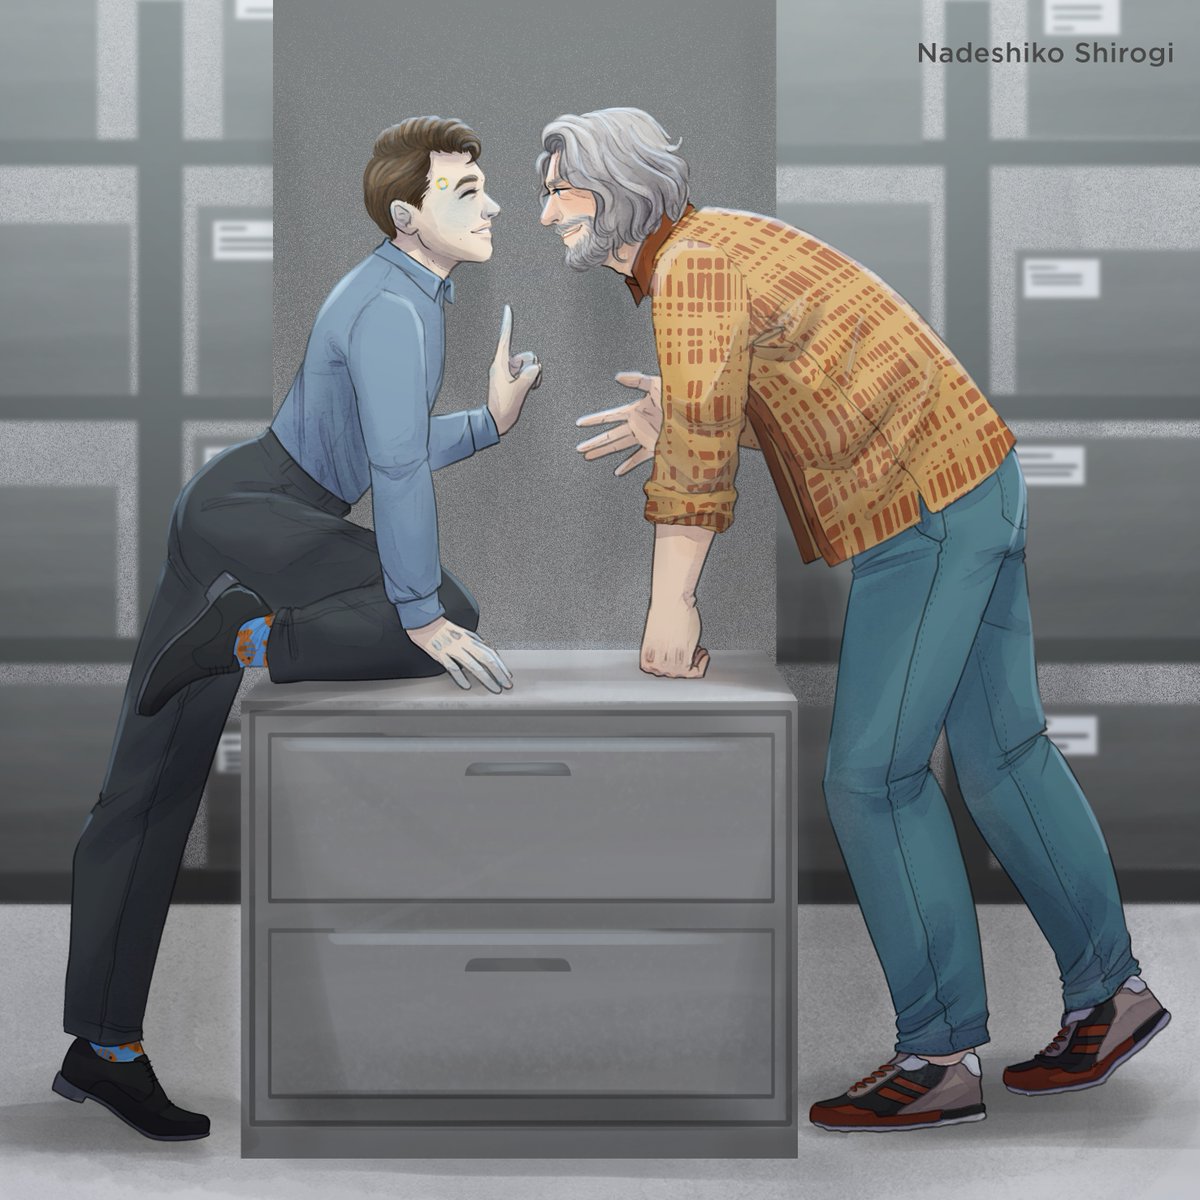 Sometimes Hank and Connor disagree on their guesses about the cases, though even arguing in the file room there are always hints of flirtation between them 😏💕 #hankcon